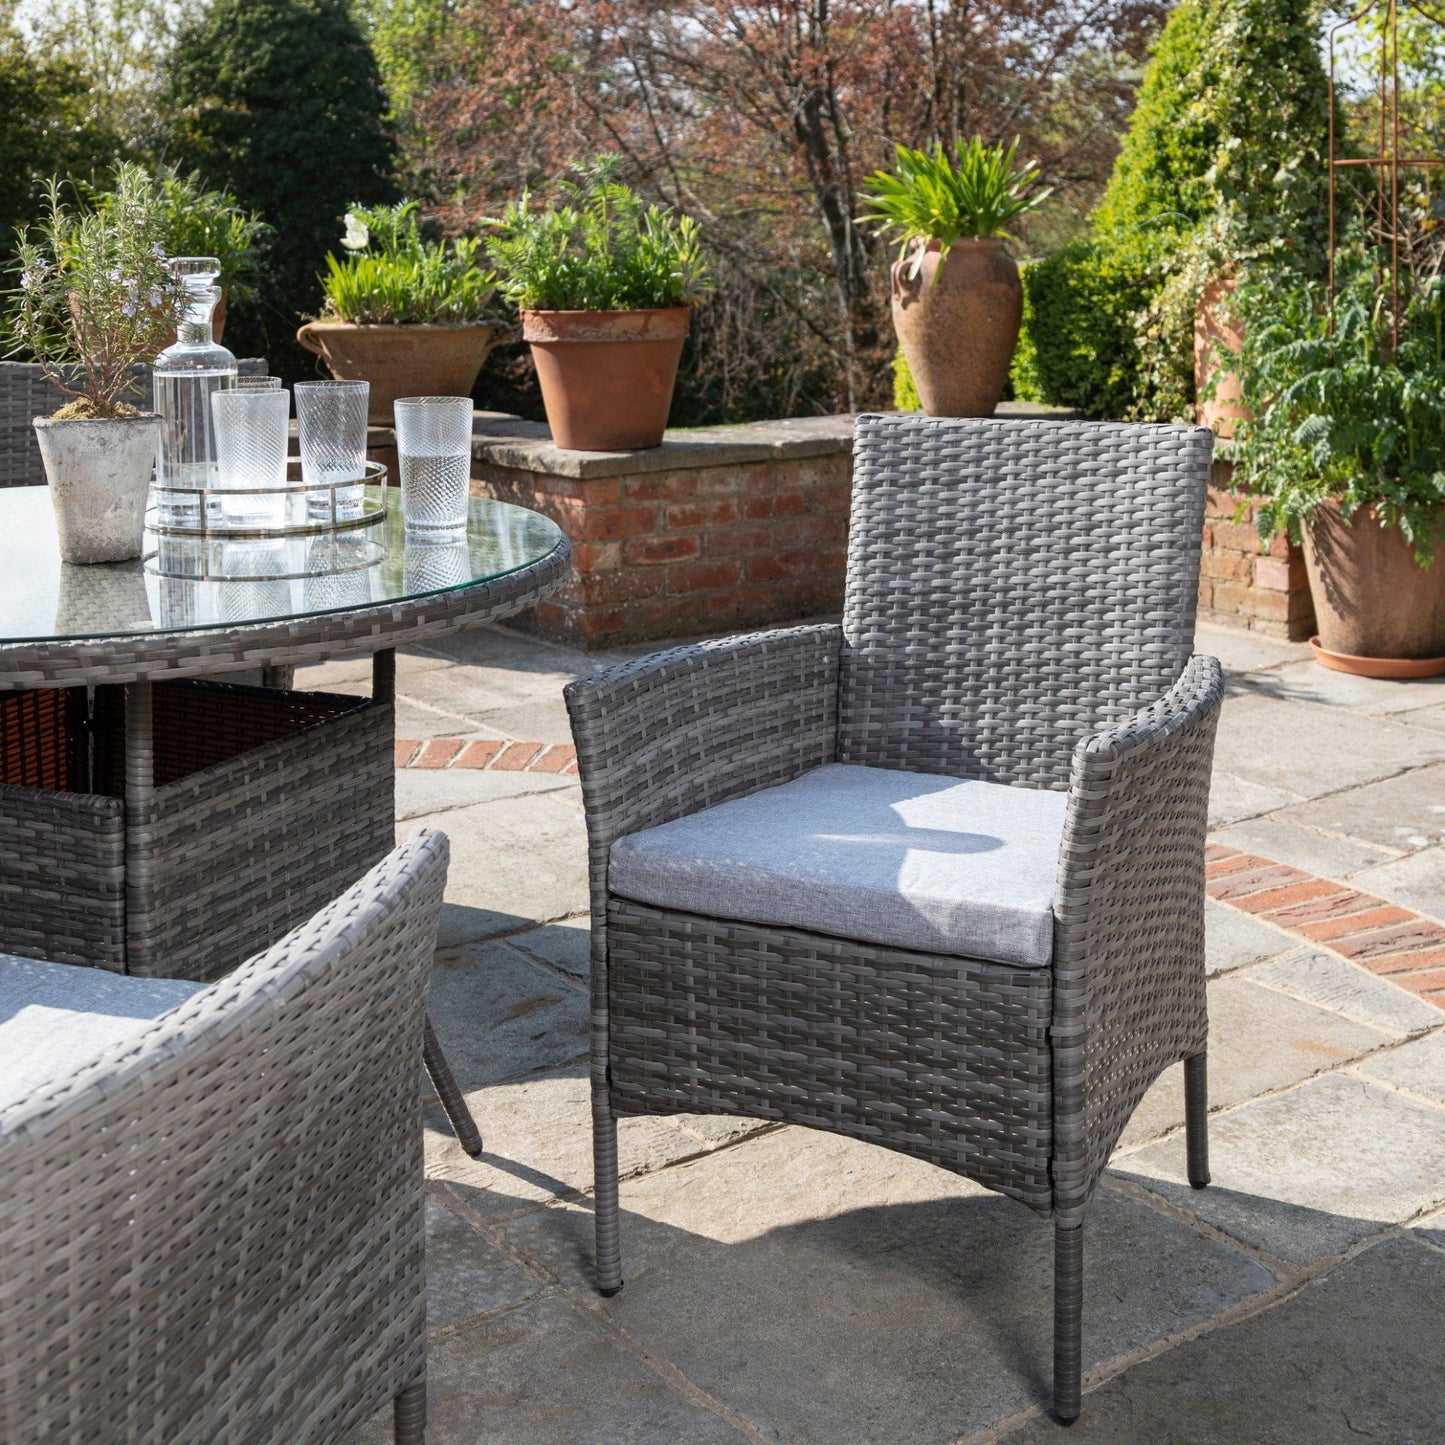 4 Seater Rattan Round Dining Set with Parasol - Grey - In Stock Date - 30th June 2020 - Laura James